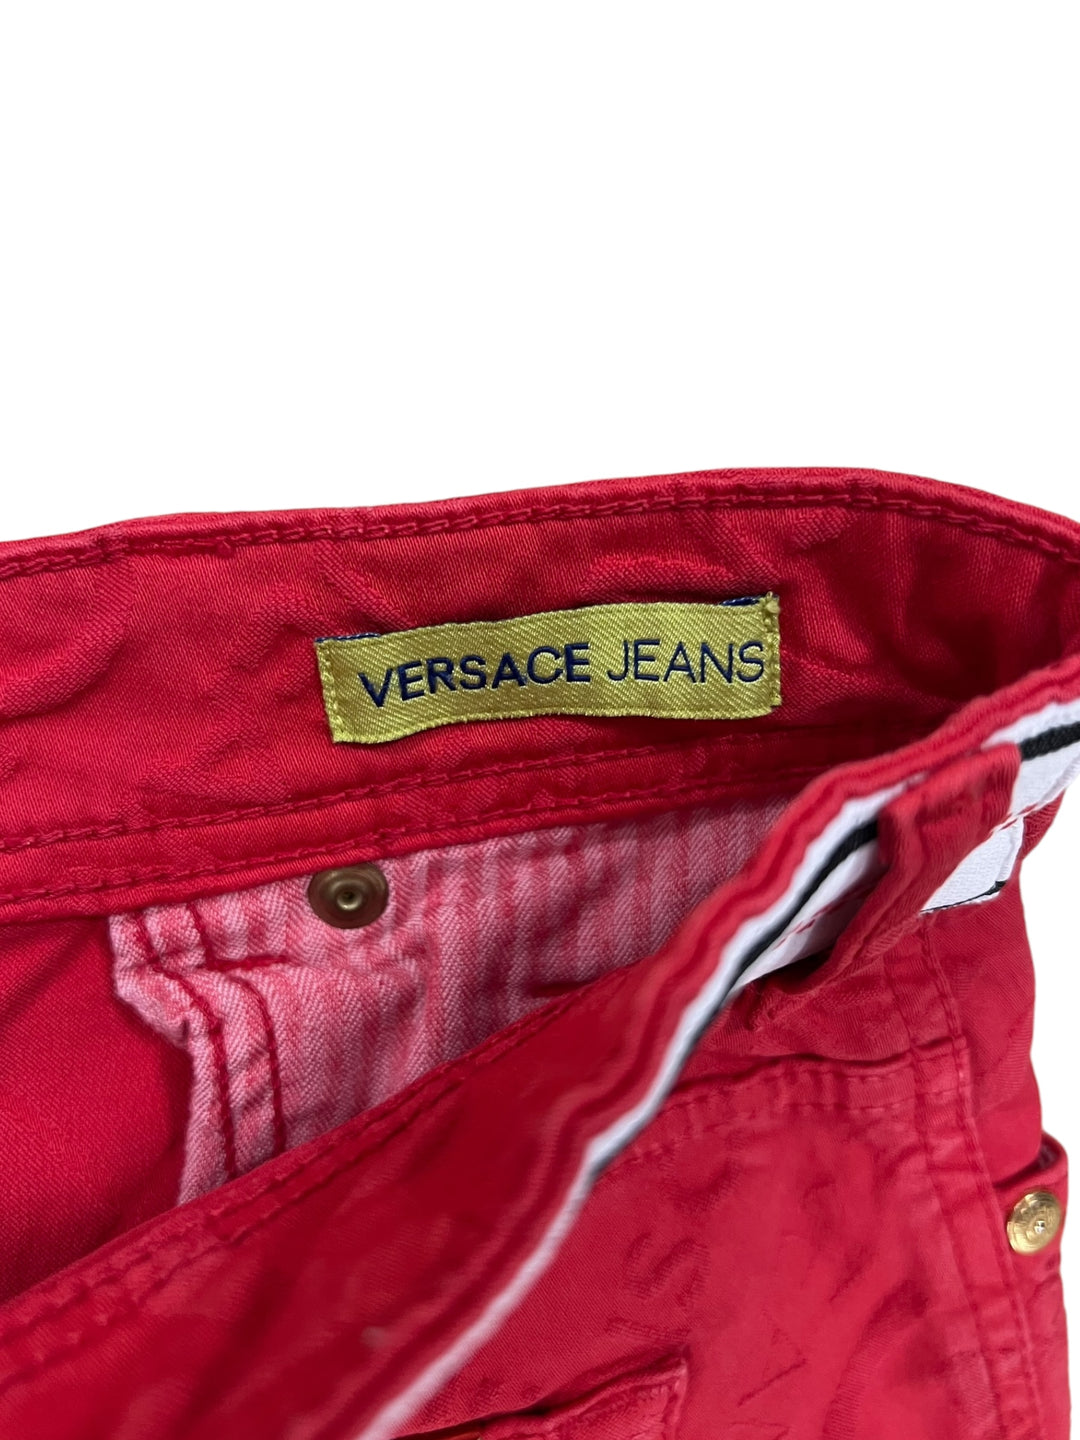 Versace jeans vintage shorts women’s small(36)